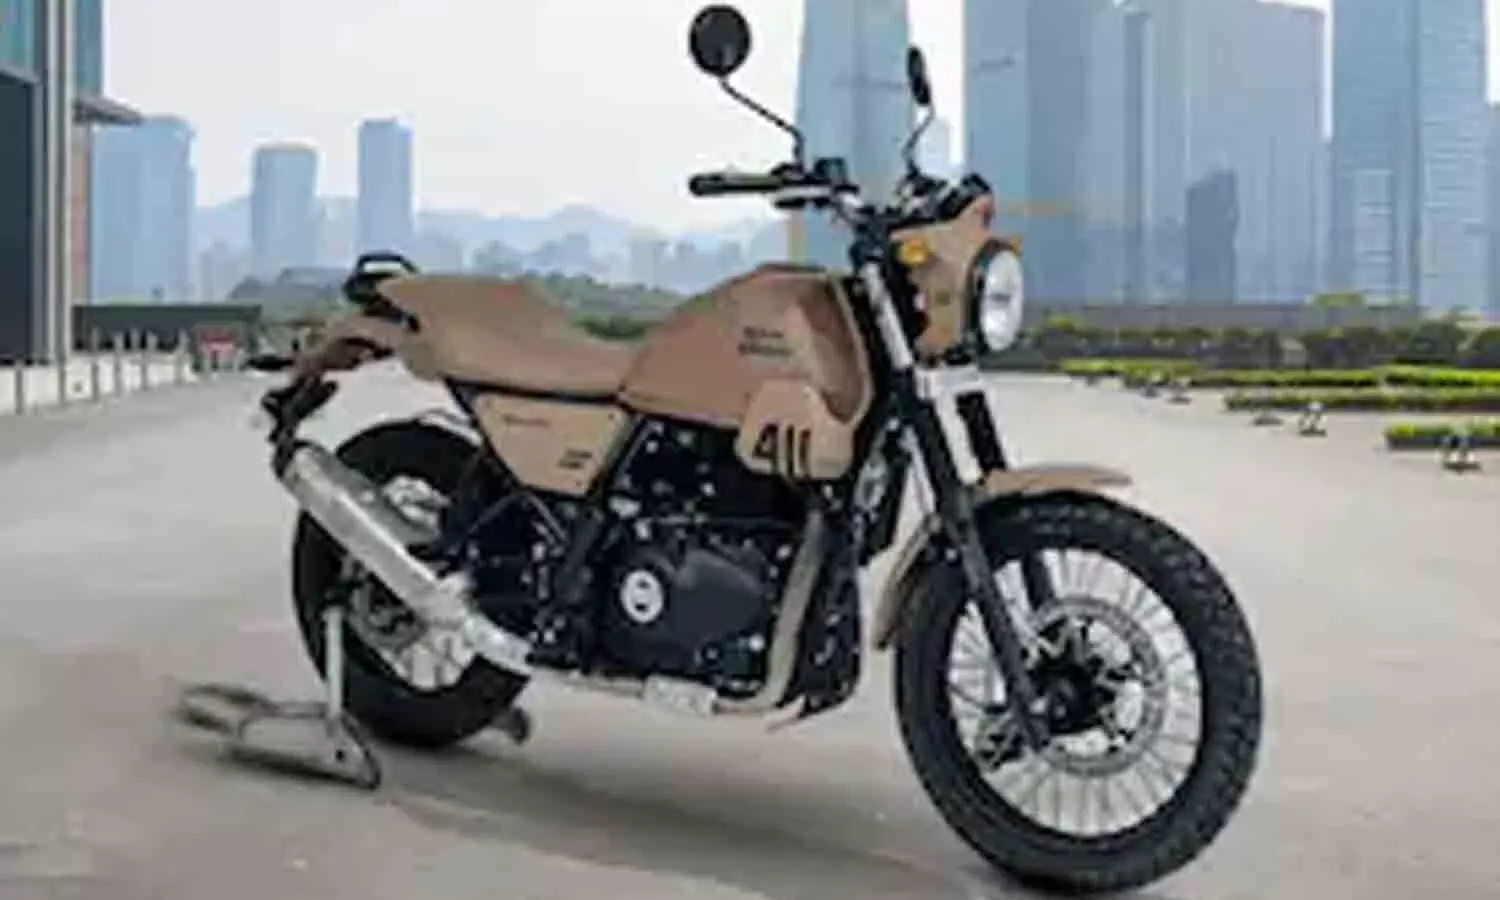 Auto News: Royal Enfield to launch new motorcycle on March 15, know its specialties